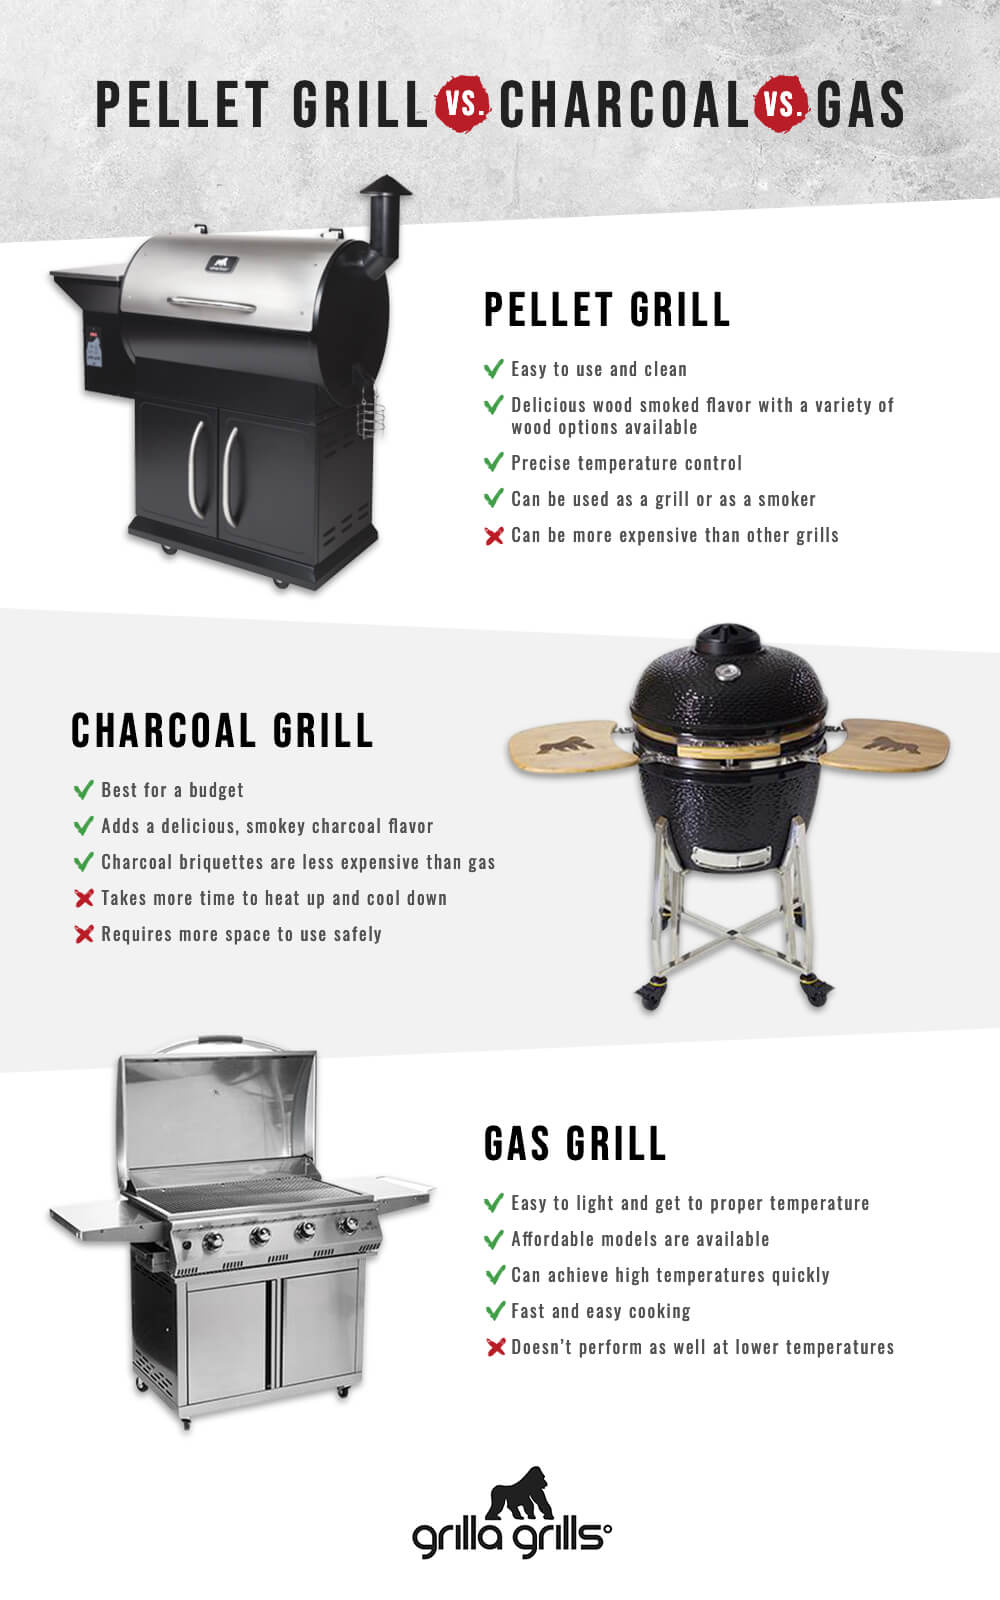 is a pellet grill better than a charcoal grill?